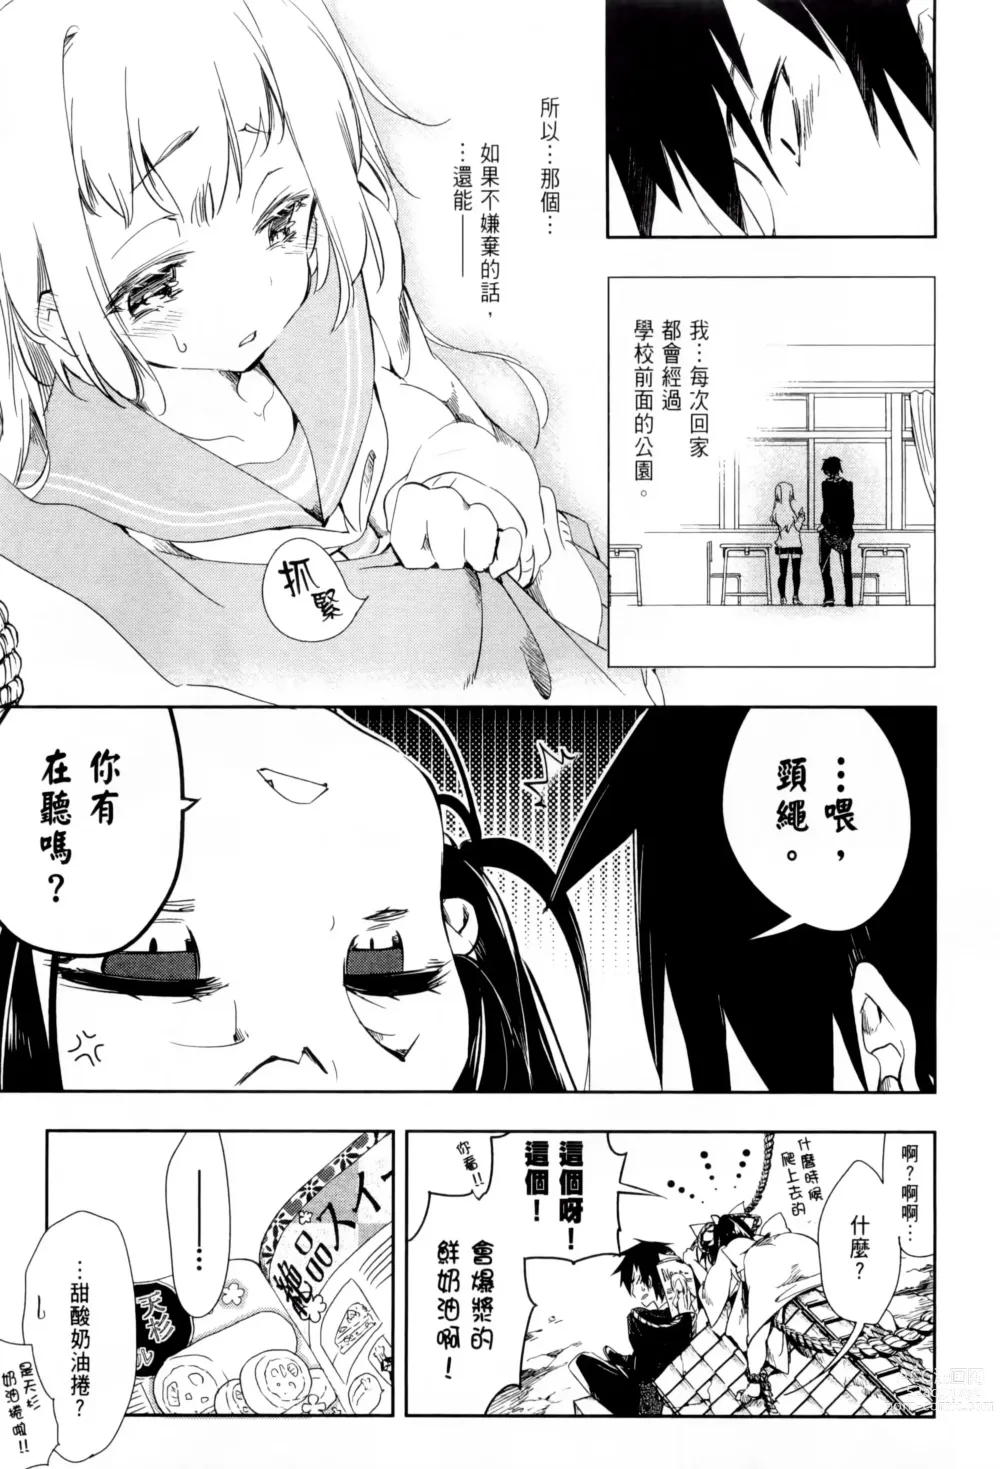 Page 110 of manga 神さまの怨結び 第1巻